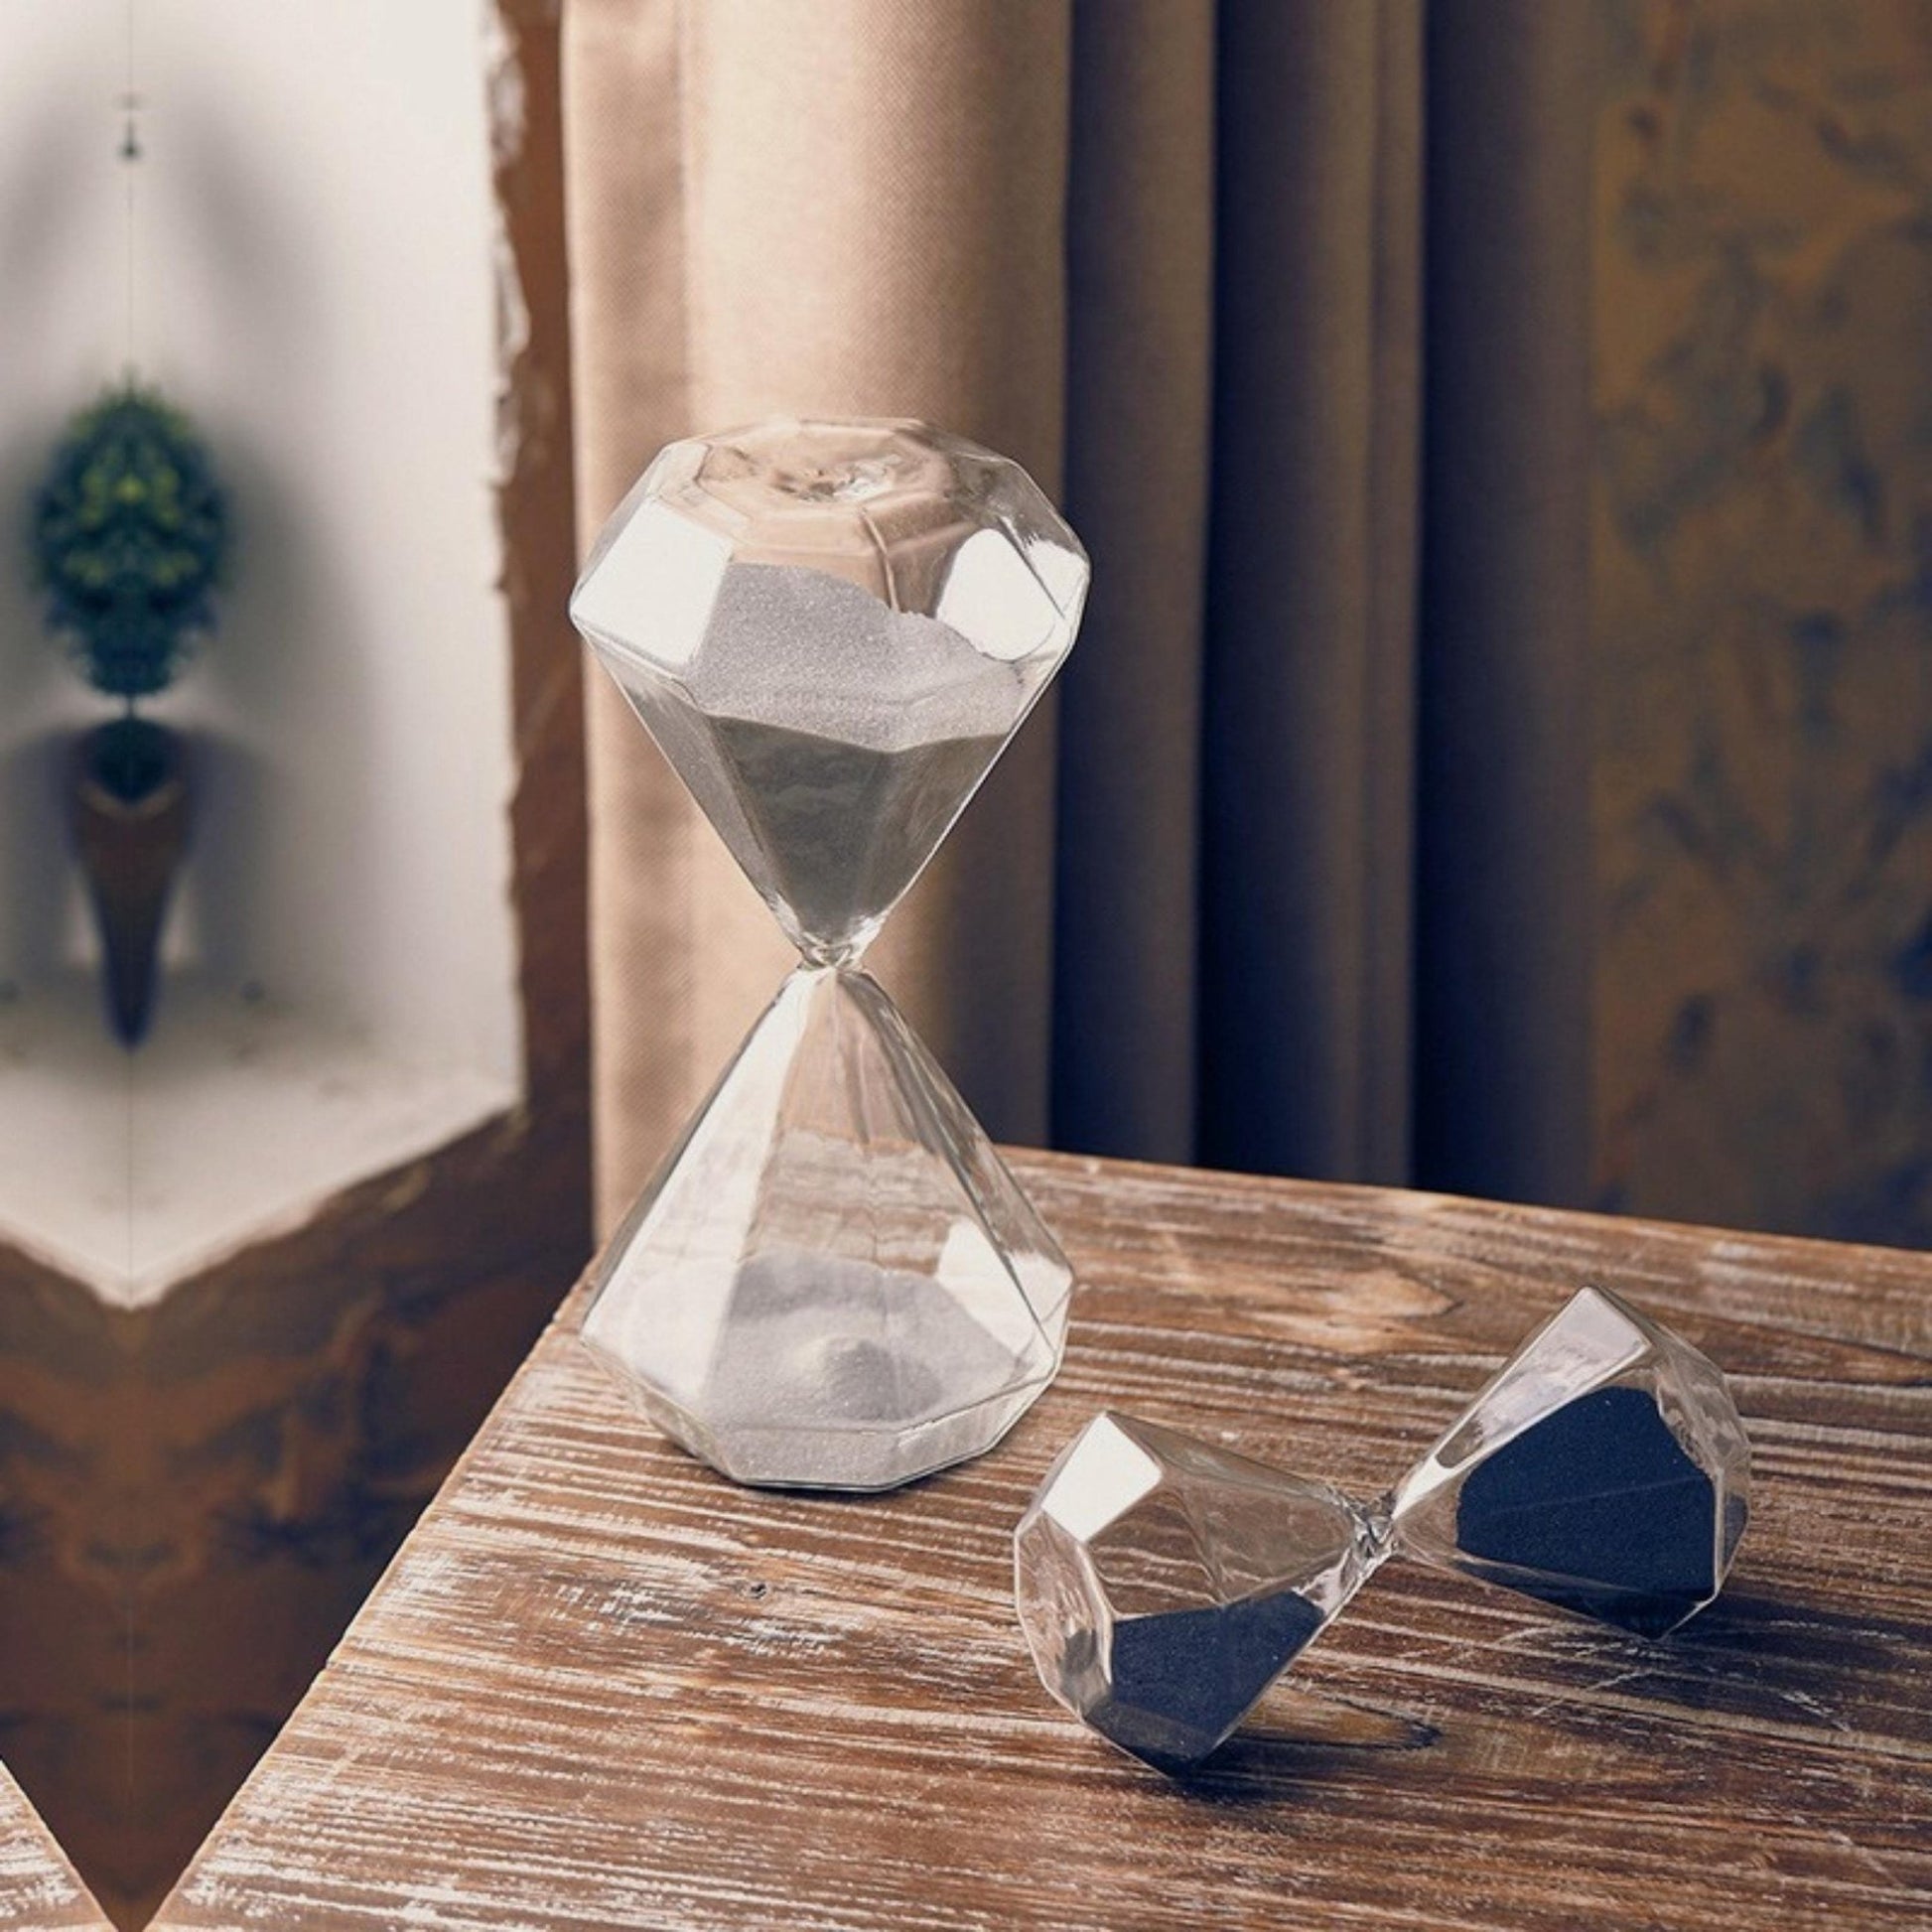 Sands of Space Diamond Hourglass - Space Mesmerise - Space Gifts | Lamps | Statues | Home Decor